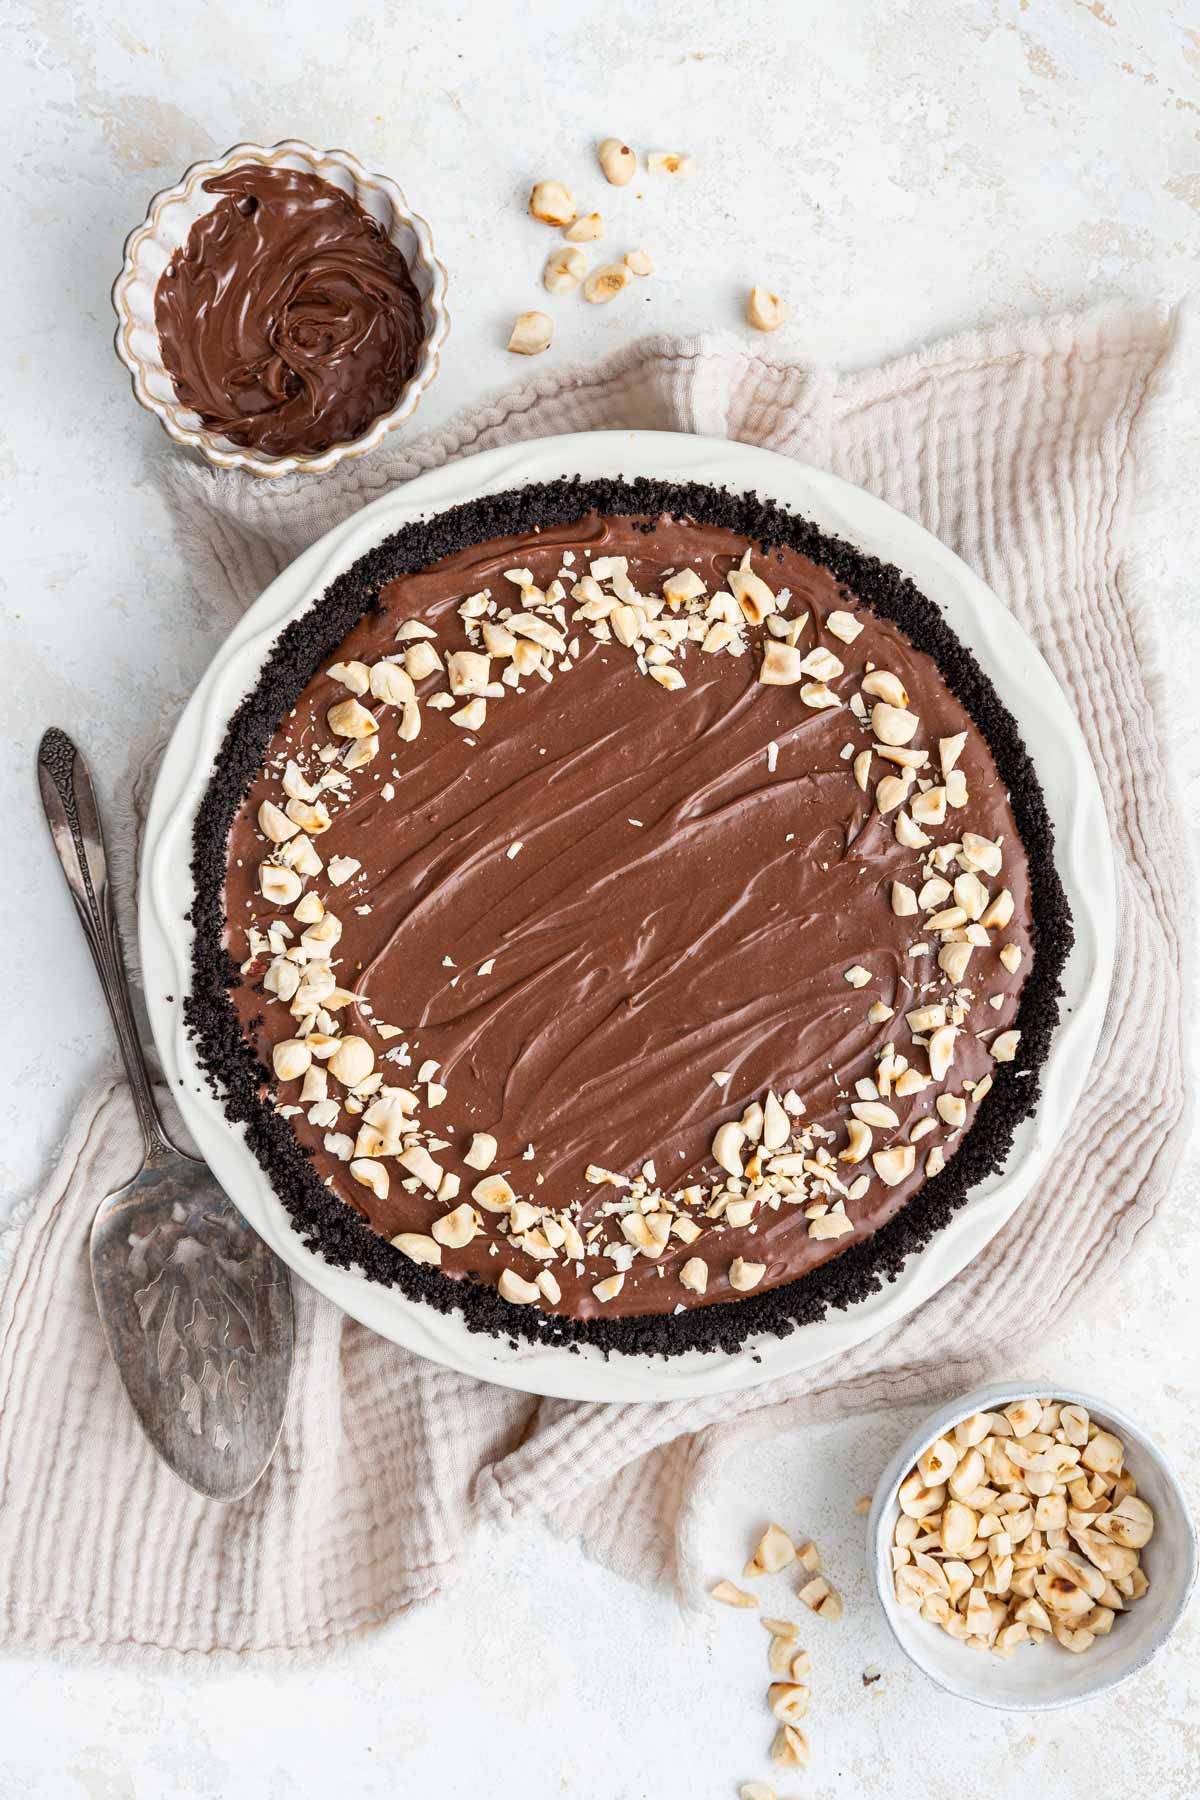 oreo pie crust filled with creamy nutella no bake filling and decorated with chopped hazelnuts